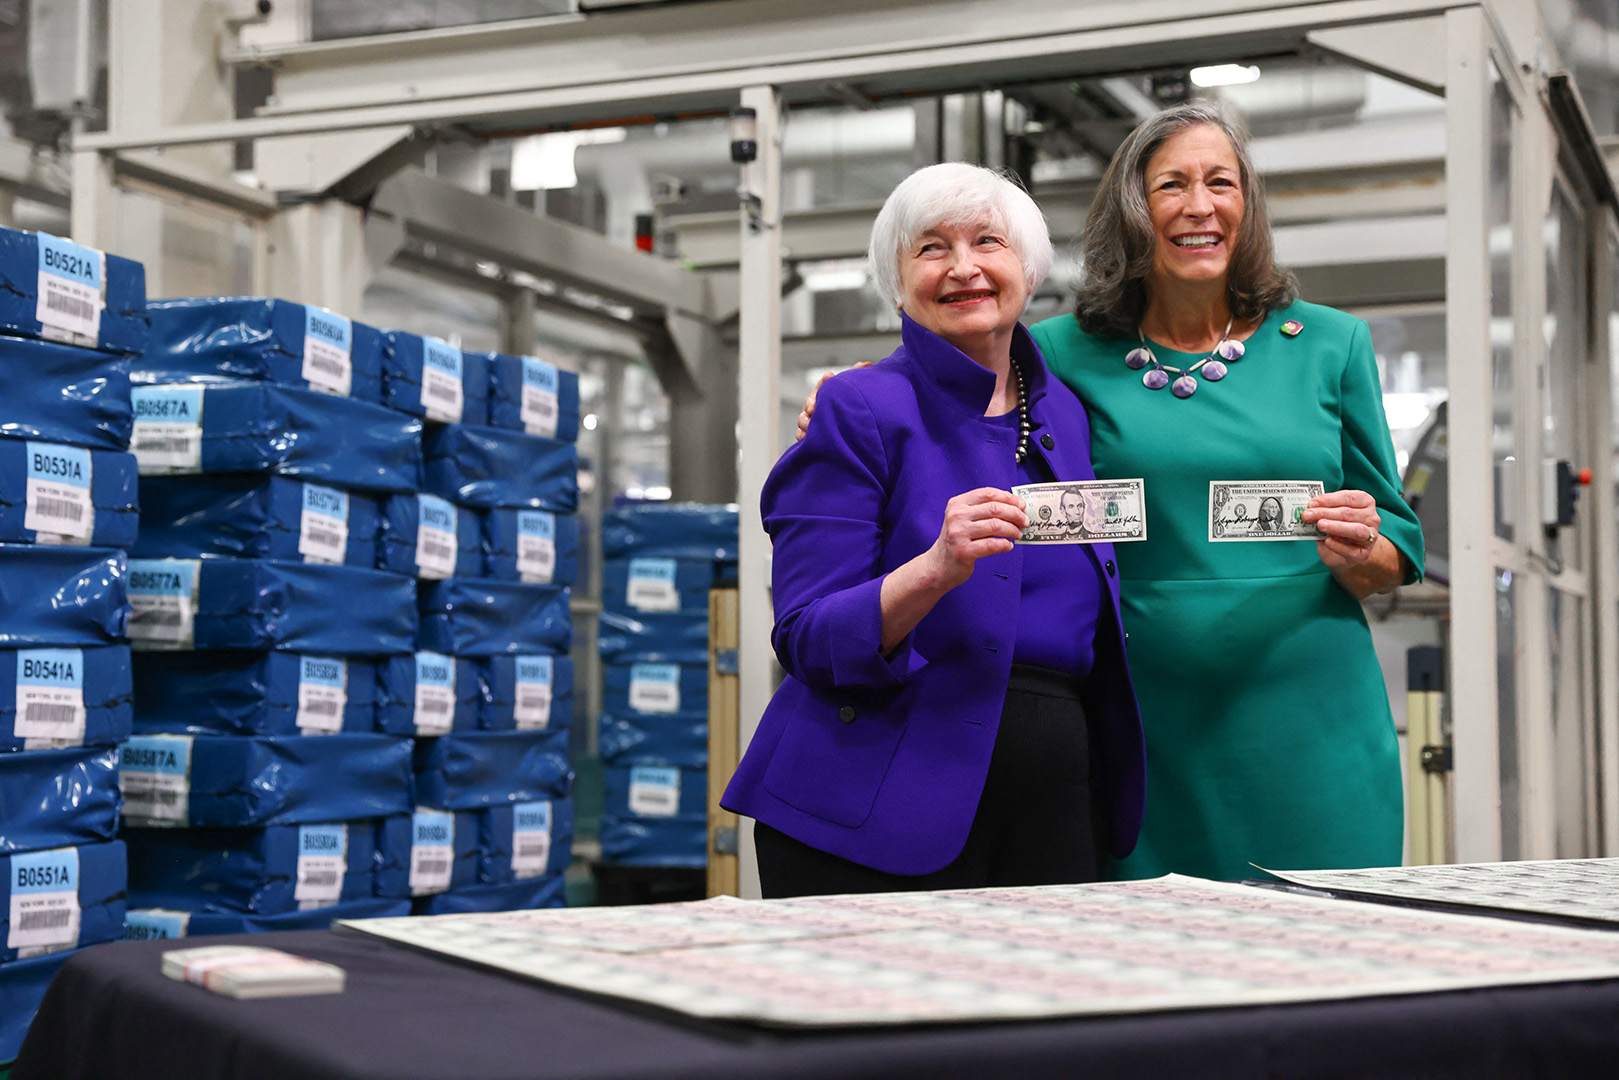 US Treasury Secretary Janet Yellen and Treasurer Marilynn Malerba hold notes with their signatures at the Bureau of Engraving and Printing Western Currency Facility on December 8, 2022 in Fort Worth, Texas. - The US dollar will bear two women's signatures for the first time, belonging to Treasury Secretary Janet Yellen and Treasurer Lynn Malerba, officials said Thursday as they unveiled the banknotes.